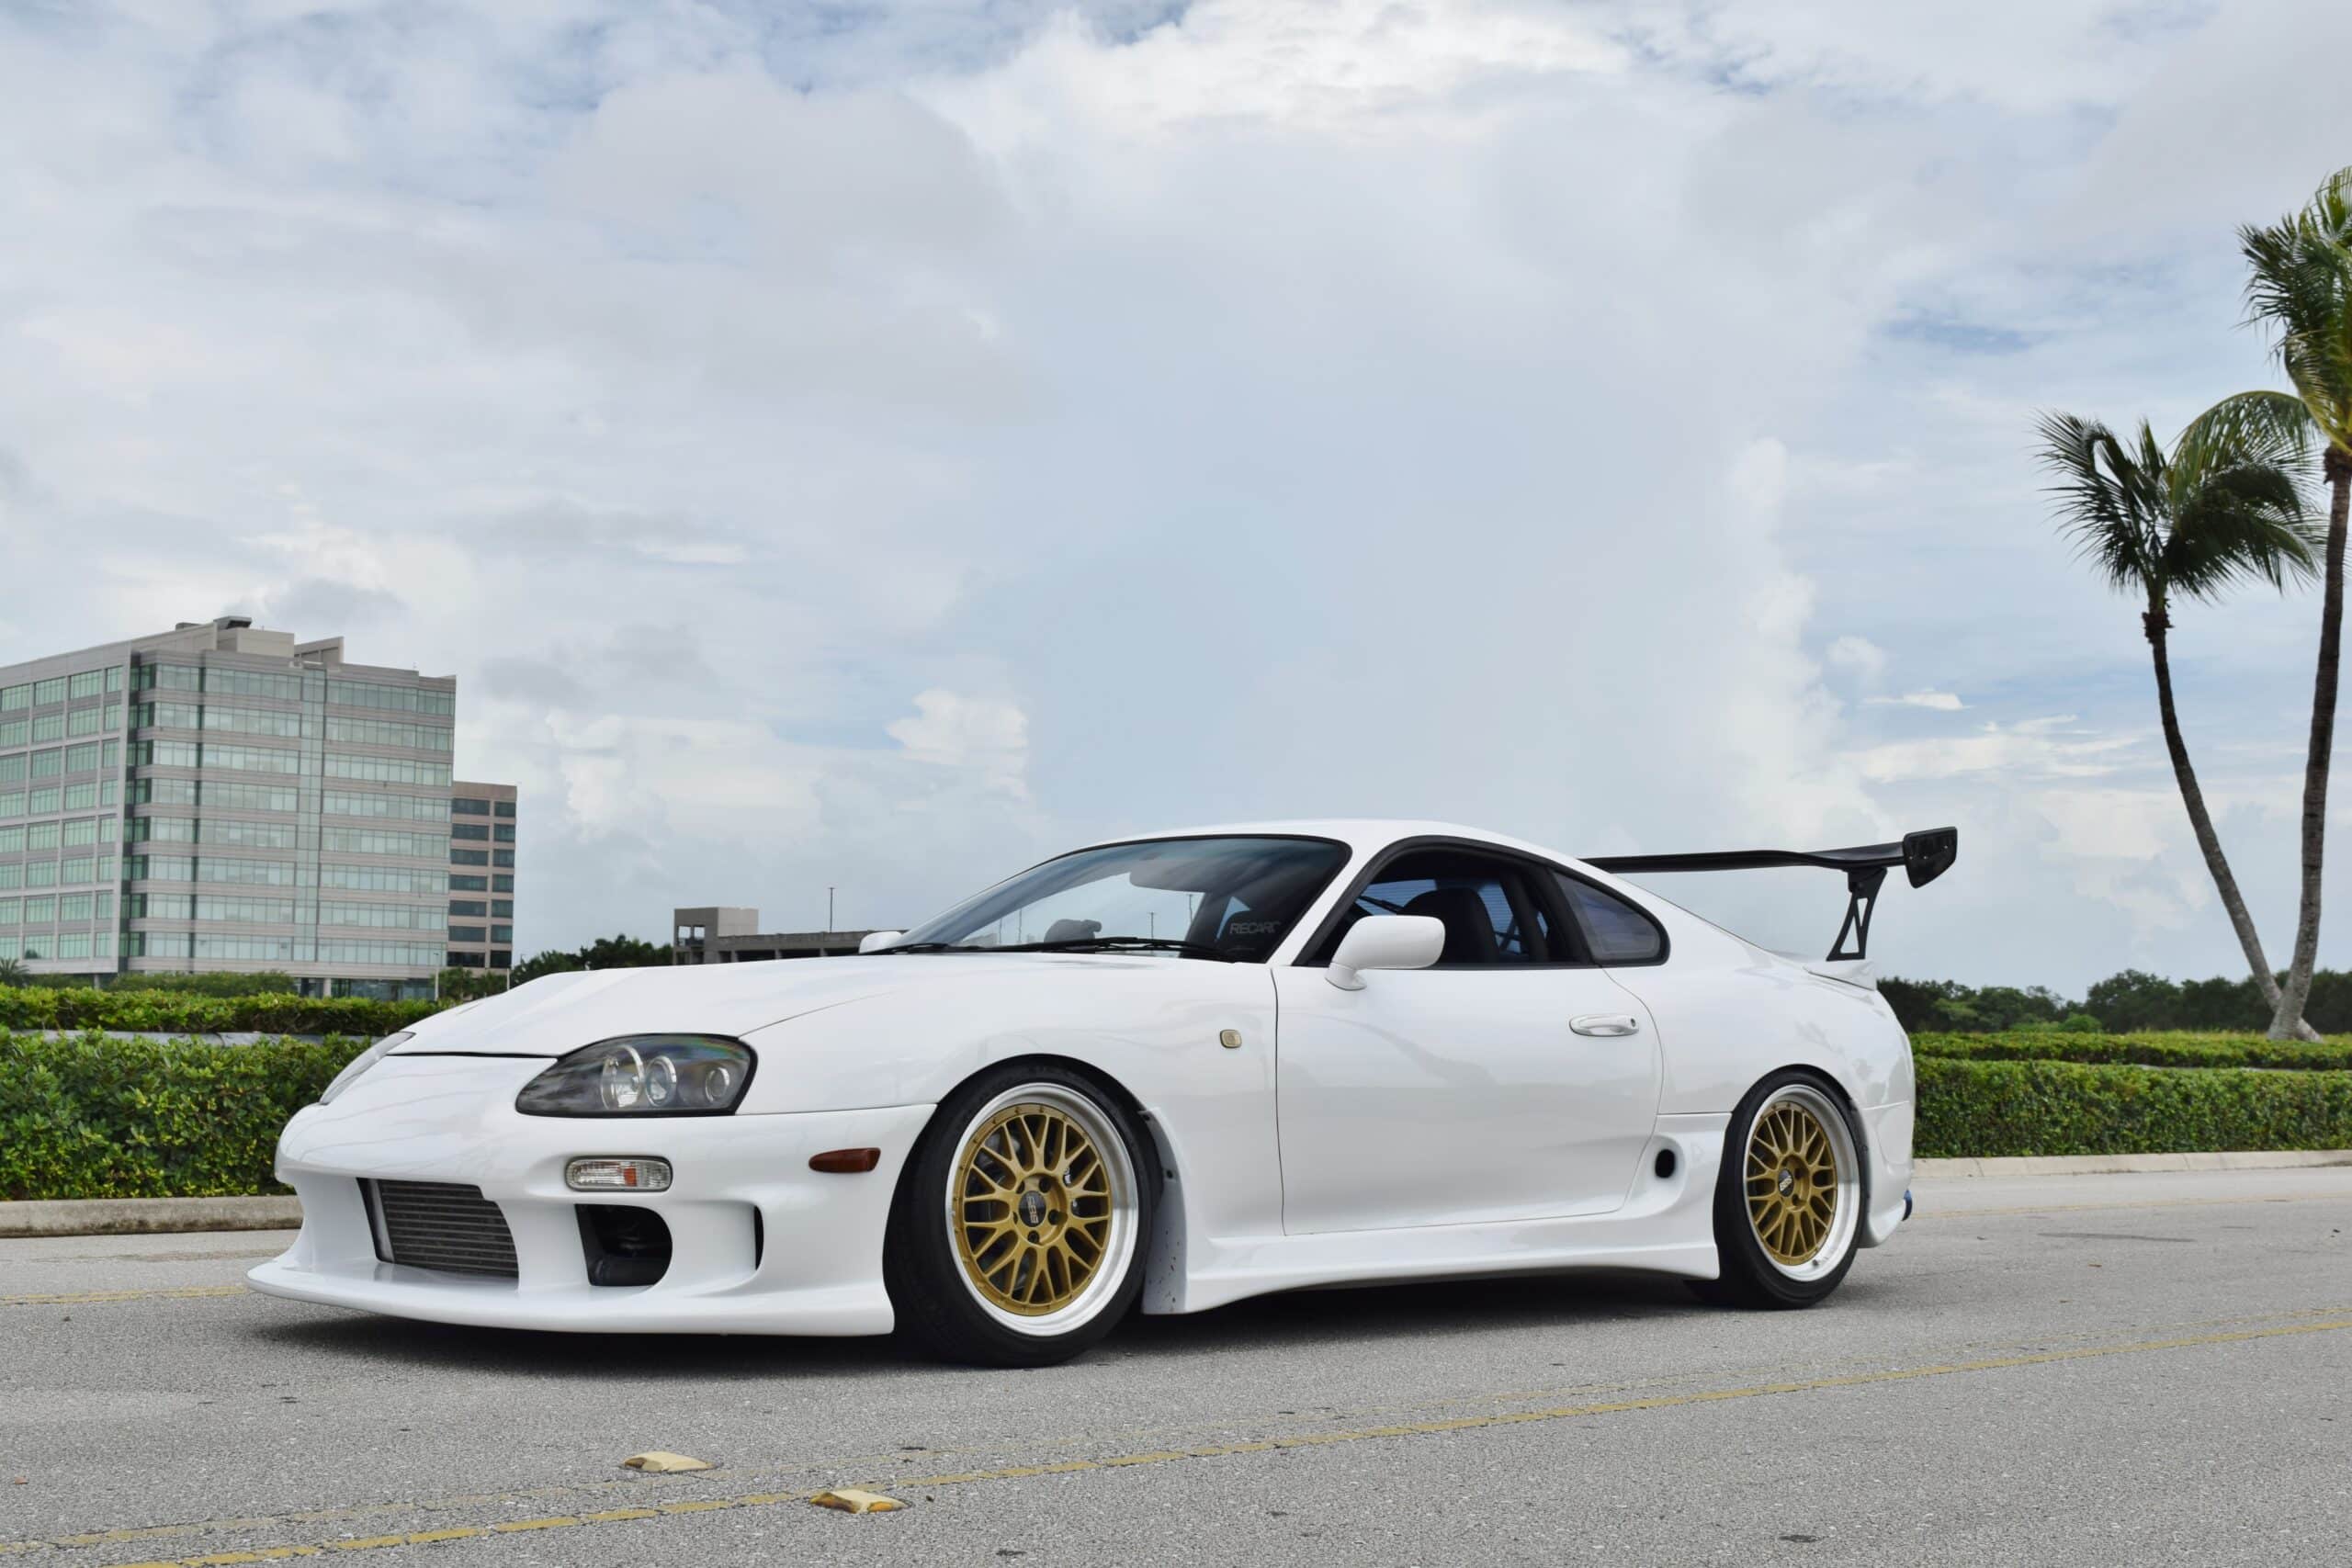 1995 Toyota Supra RZ-S Twin Turbo 2JZ GTE -Factory 6 Speed Manual- BBS LM-Recaro-Tein Coilovers-LOW MILES- Cold AC